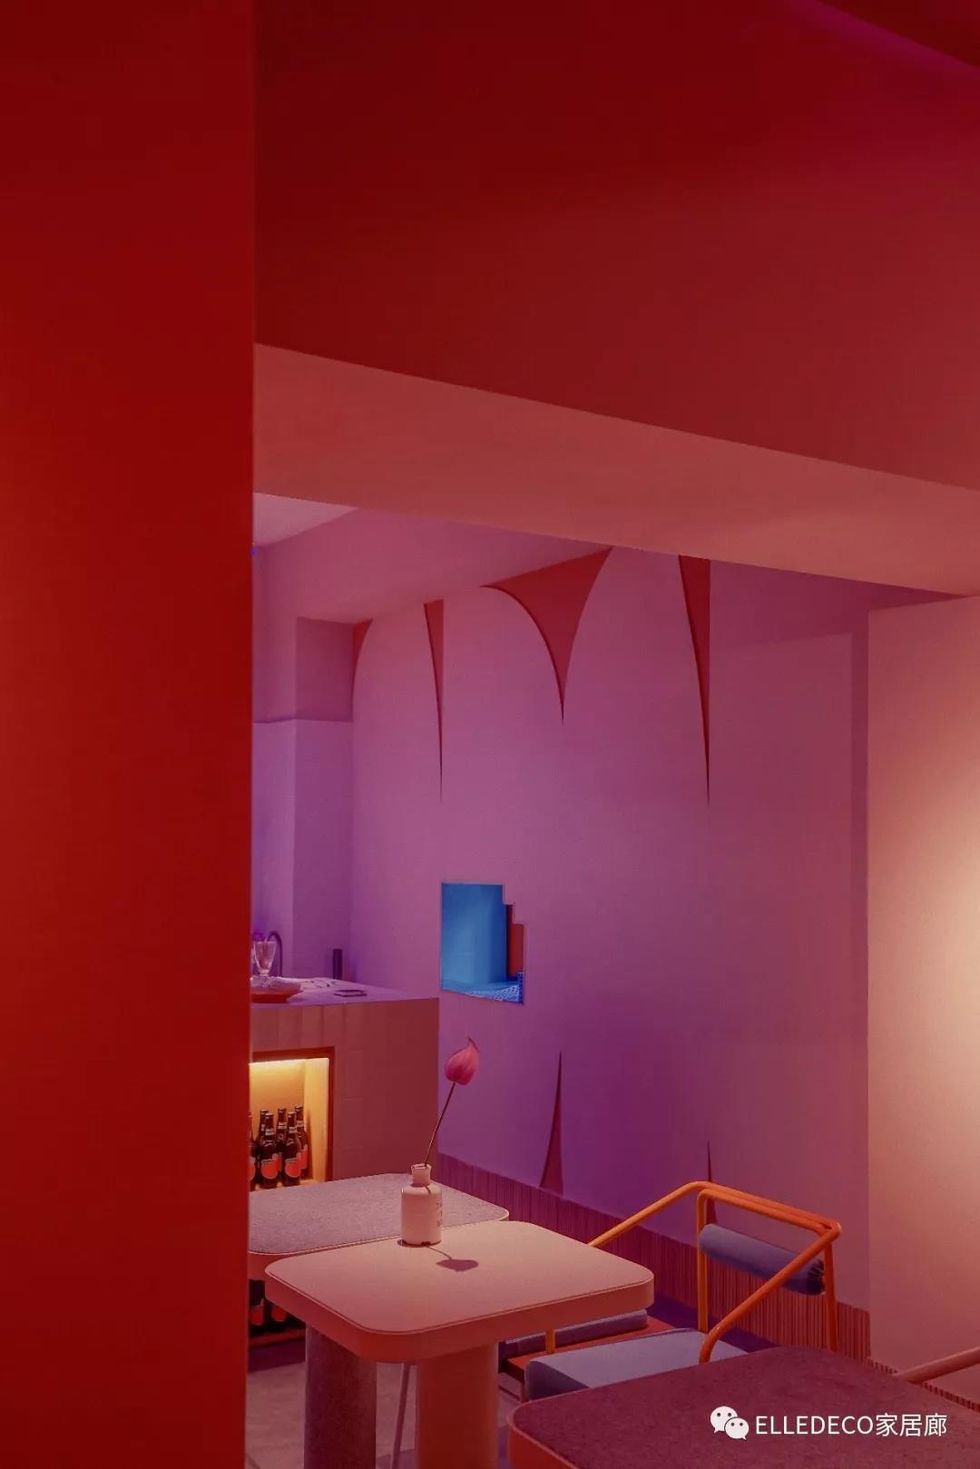 Ceiling, Red, Room, Pink, Interior design, Lighting, Wall, Architecture, Furniture, Building, 